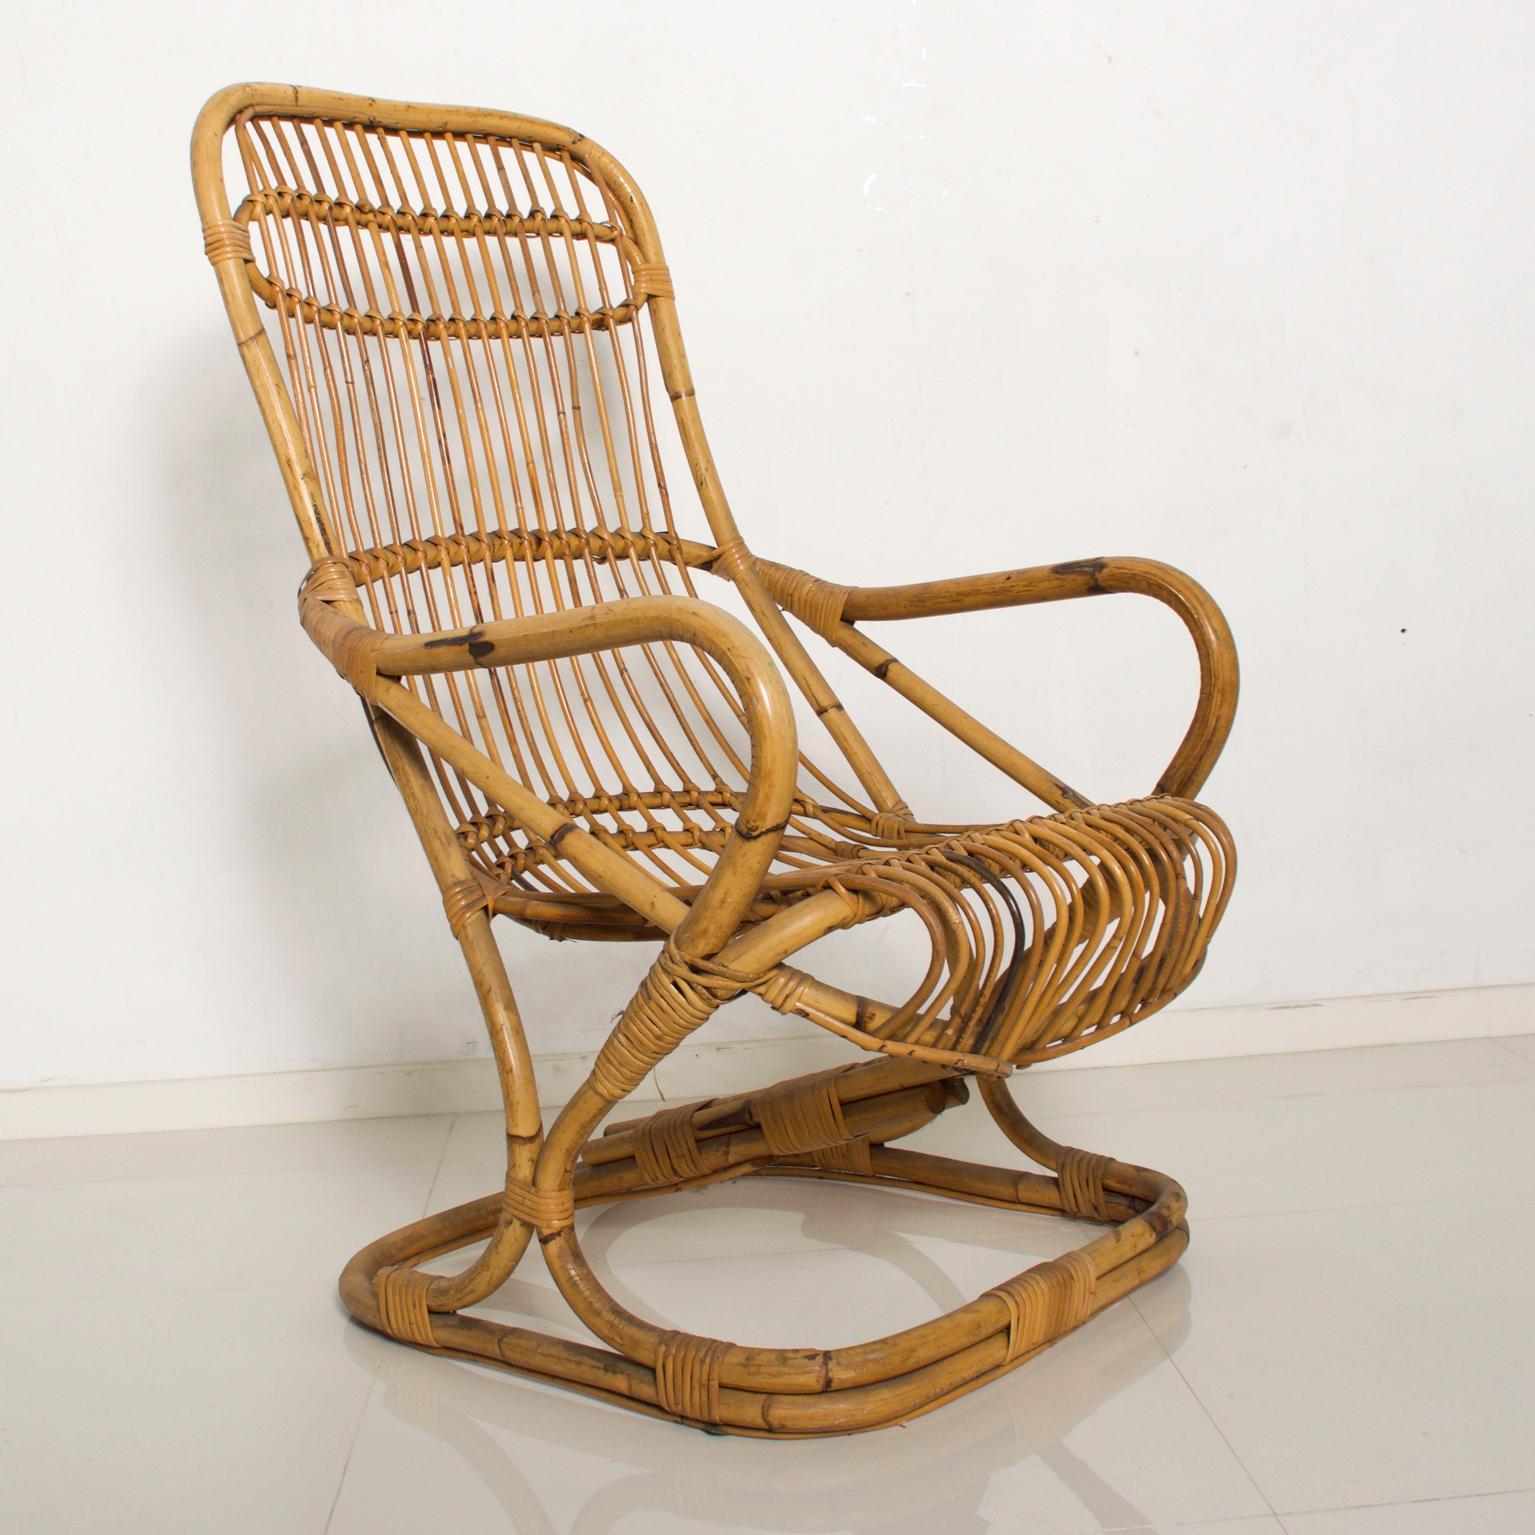 Italian Mid-Century Modern tall patio wicker and rattan comfy lounge chair from Italy. 
No attribution mark, circa 1950s
Dimensions are: 41 3/4